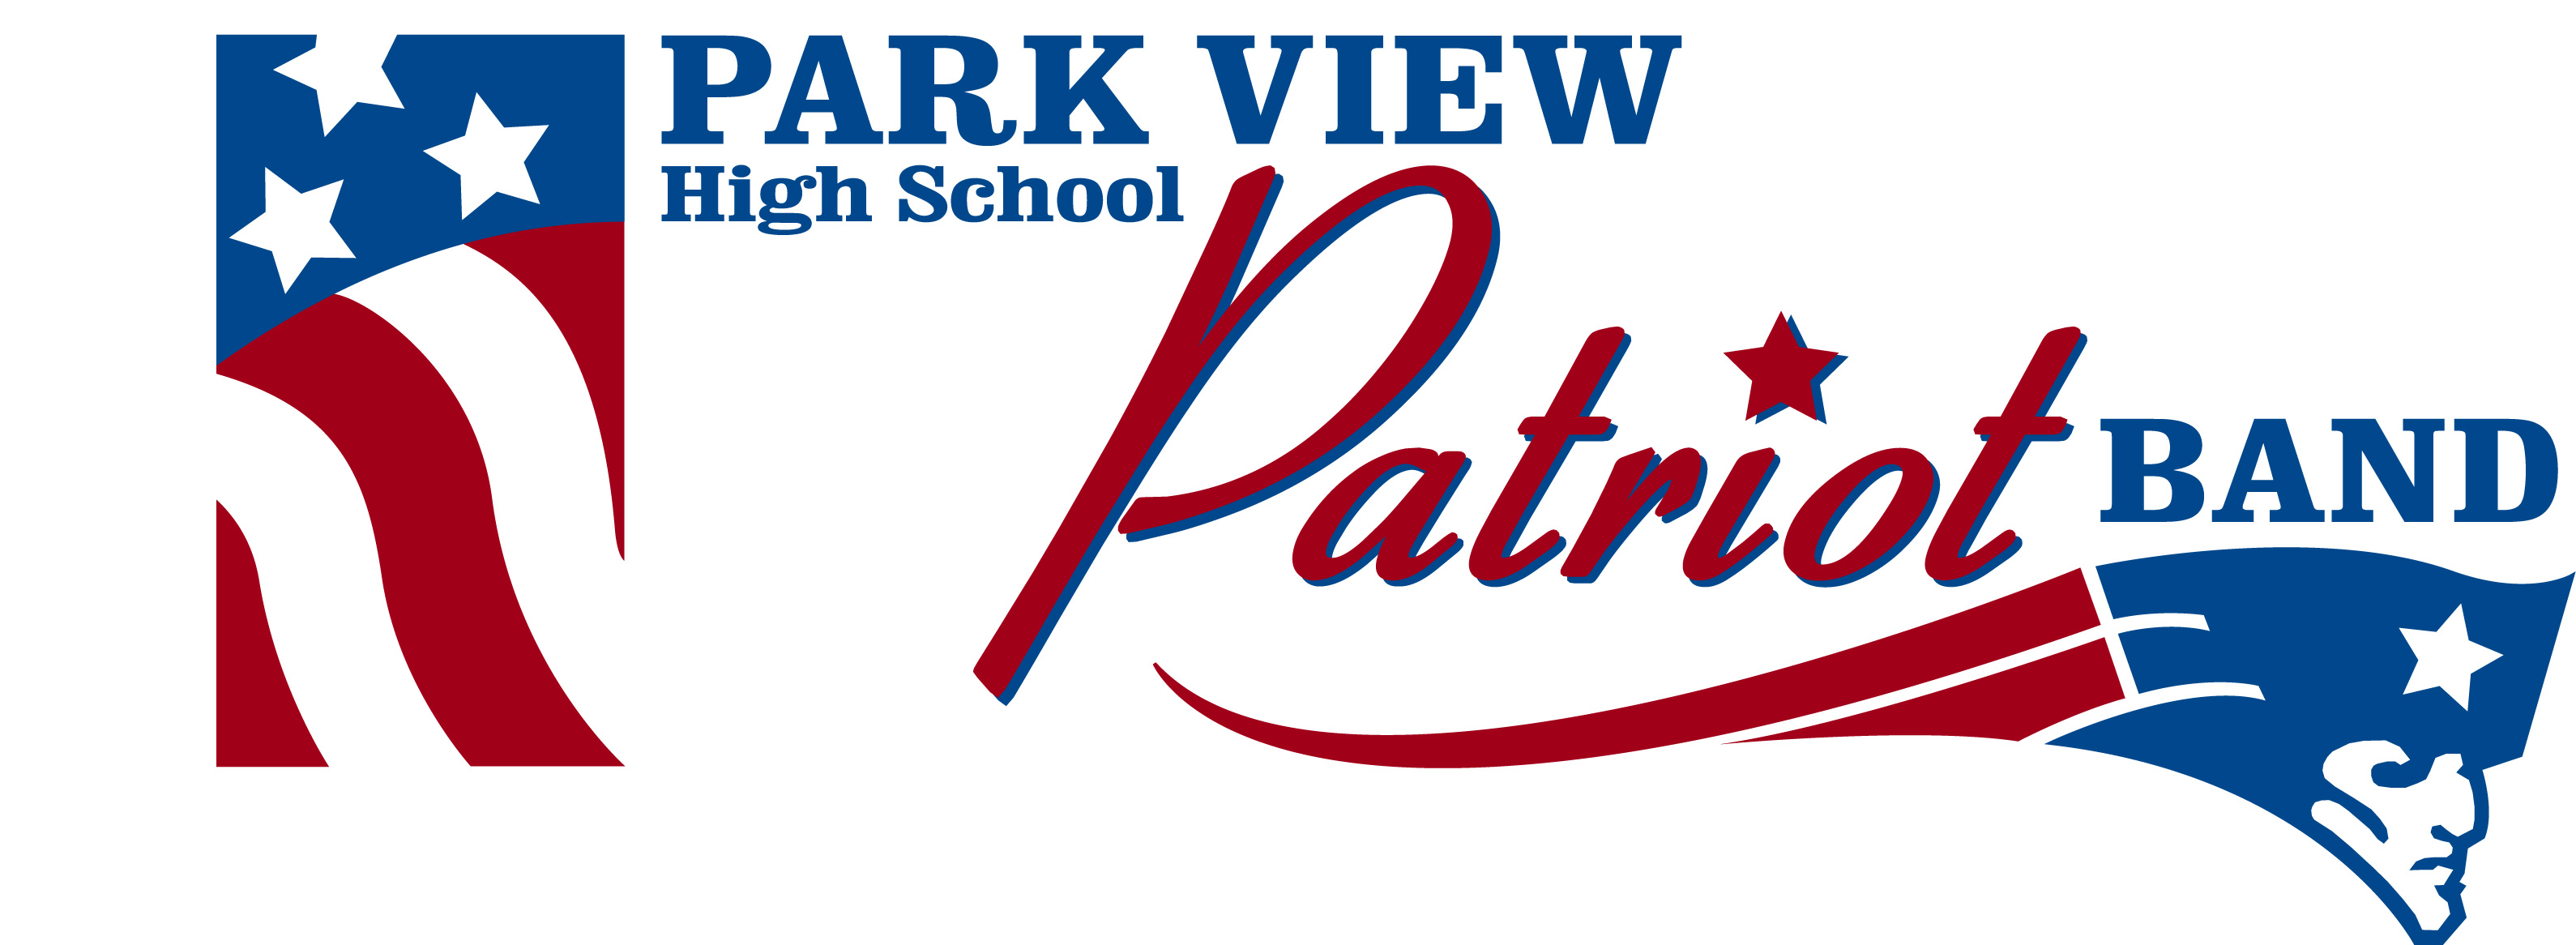 Park View High School Band